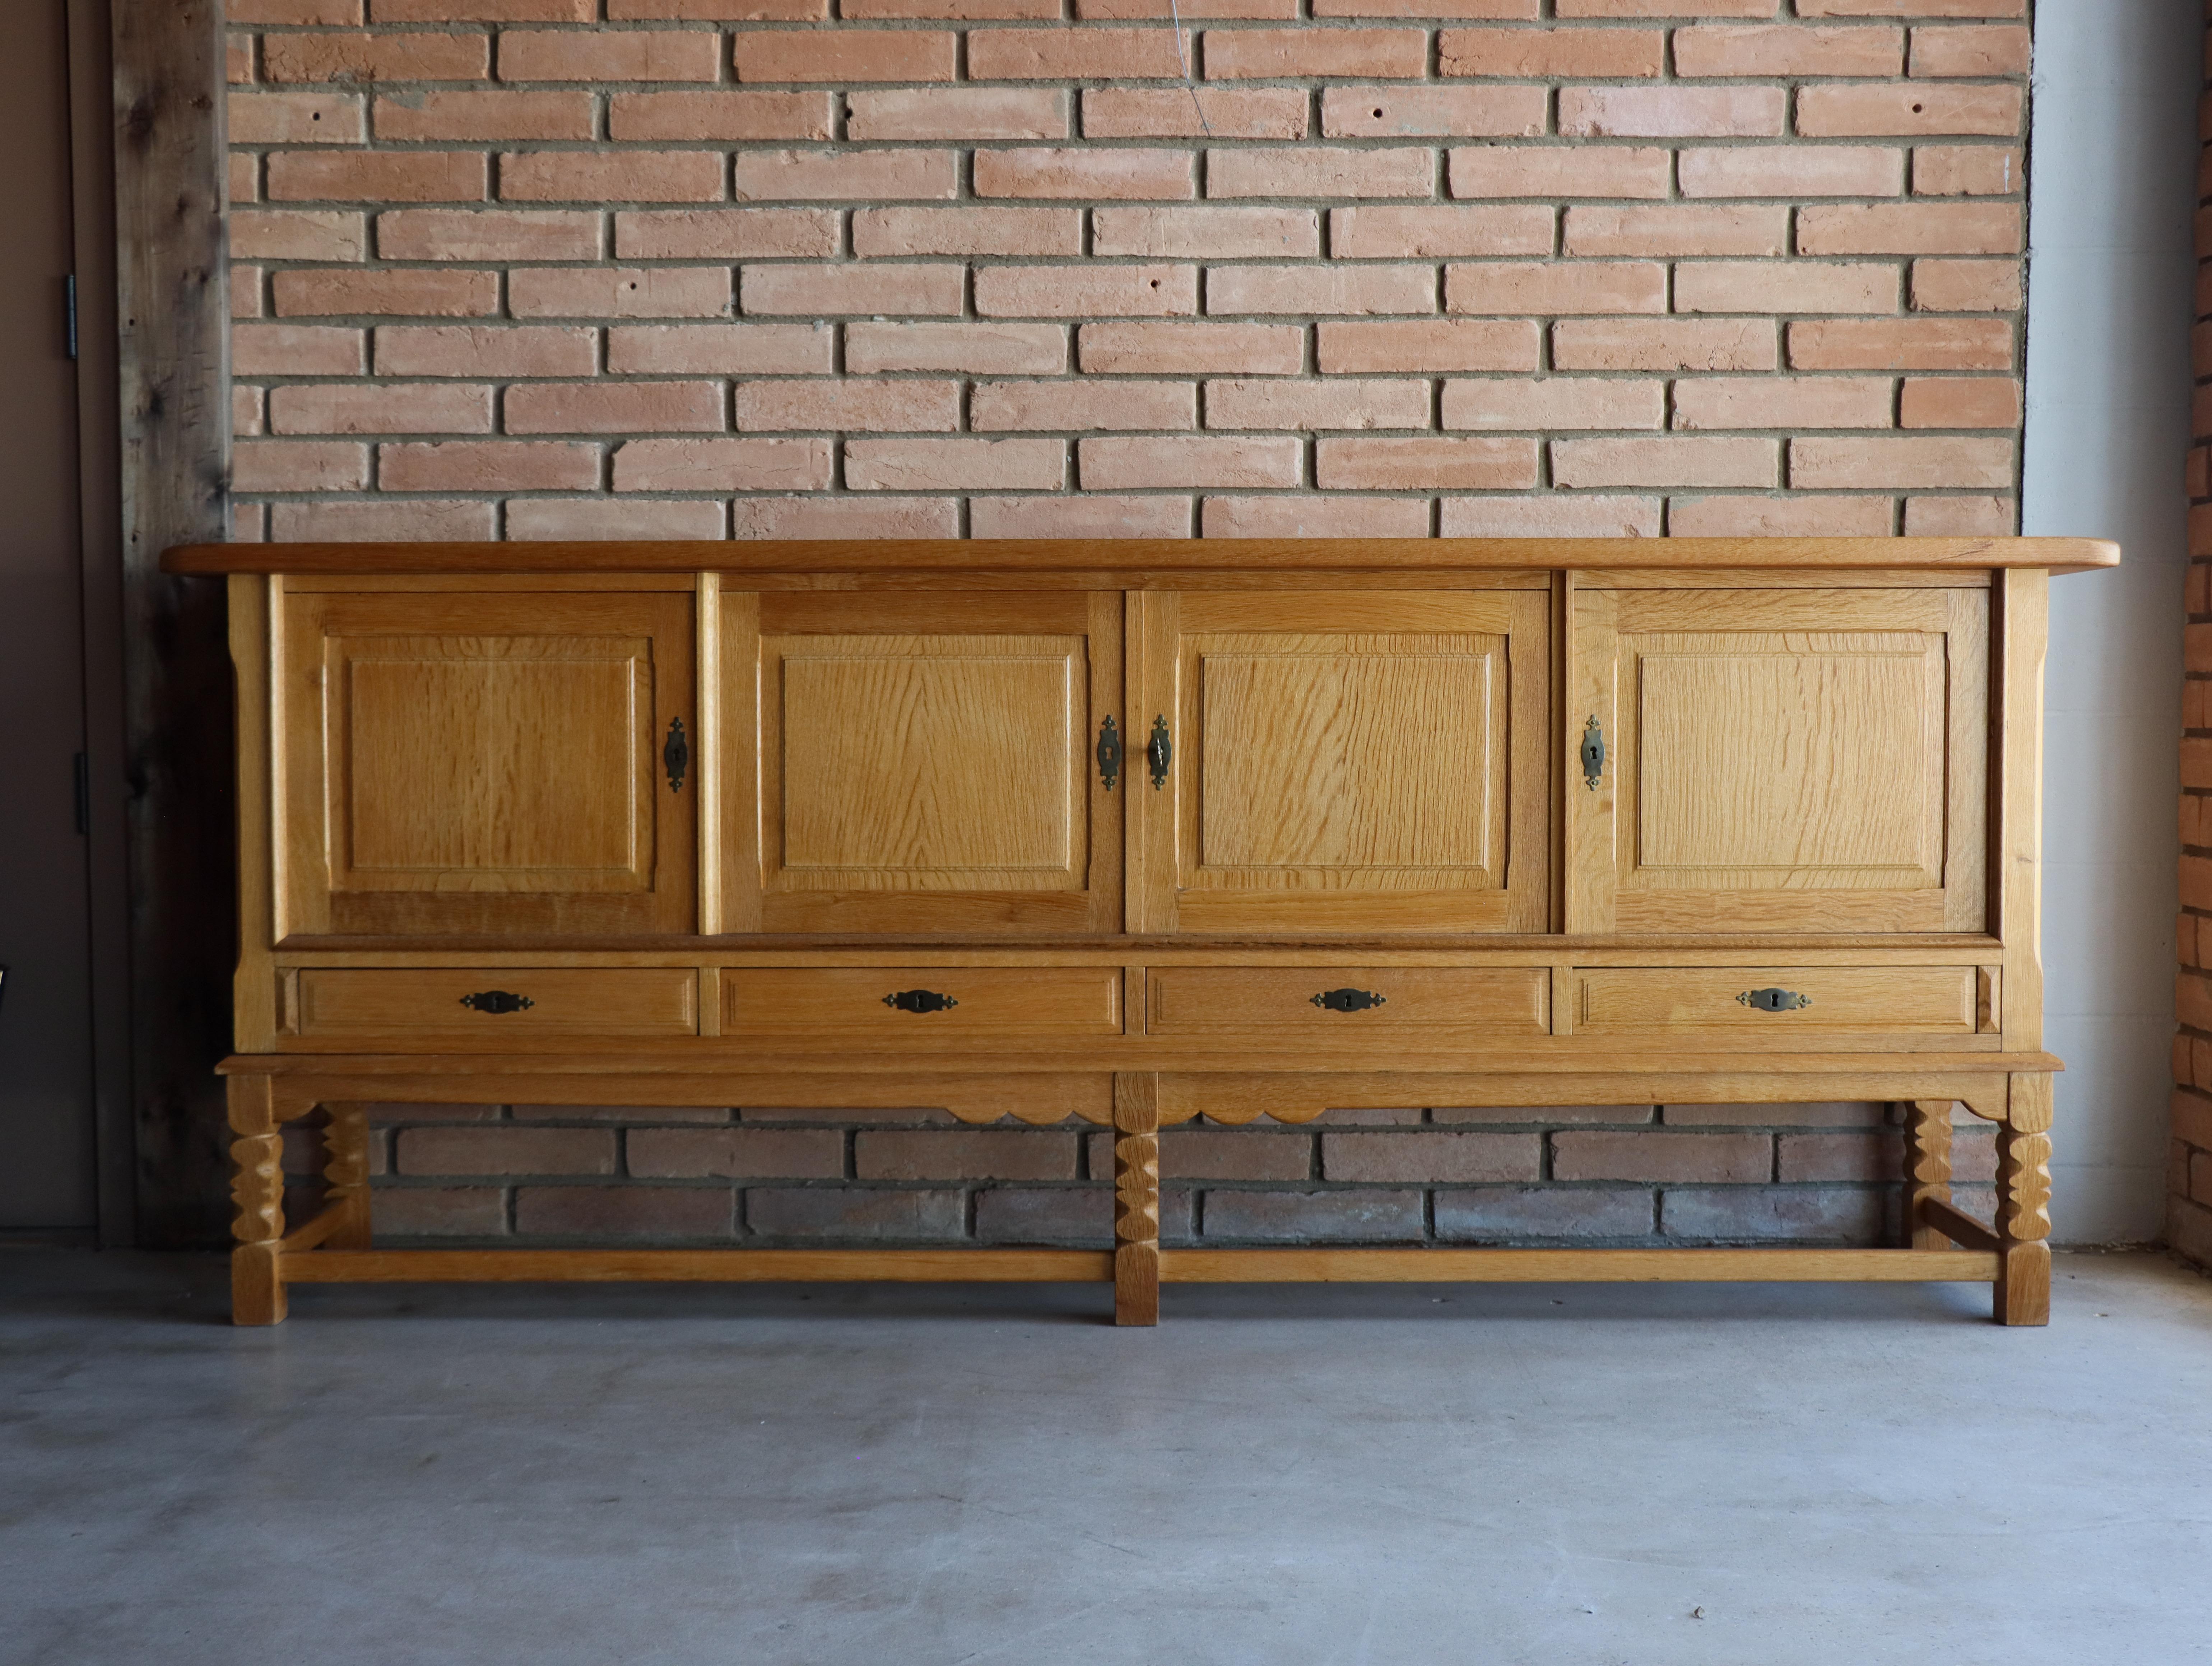  Beautiful solid oak sideboard/credenza attributed to Henning Kjæernulf, Denmark -1960s.
This beautiful example is constructed of nothing but solid quarter-sewn white oak. The cabinet front features excellent attention to refined detalls.
This